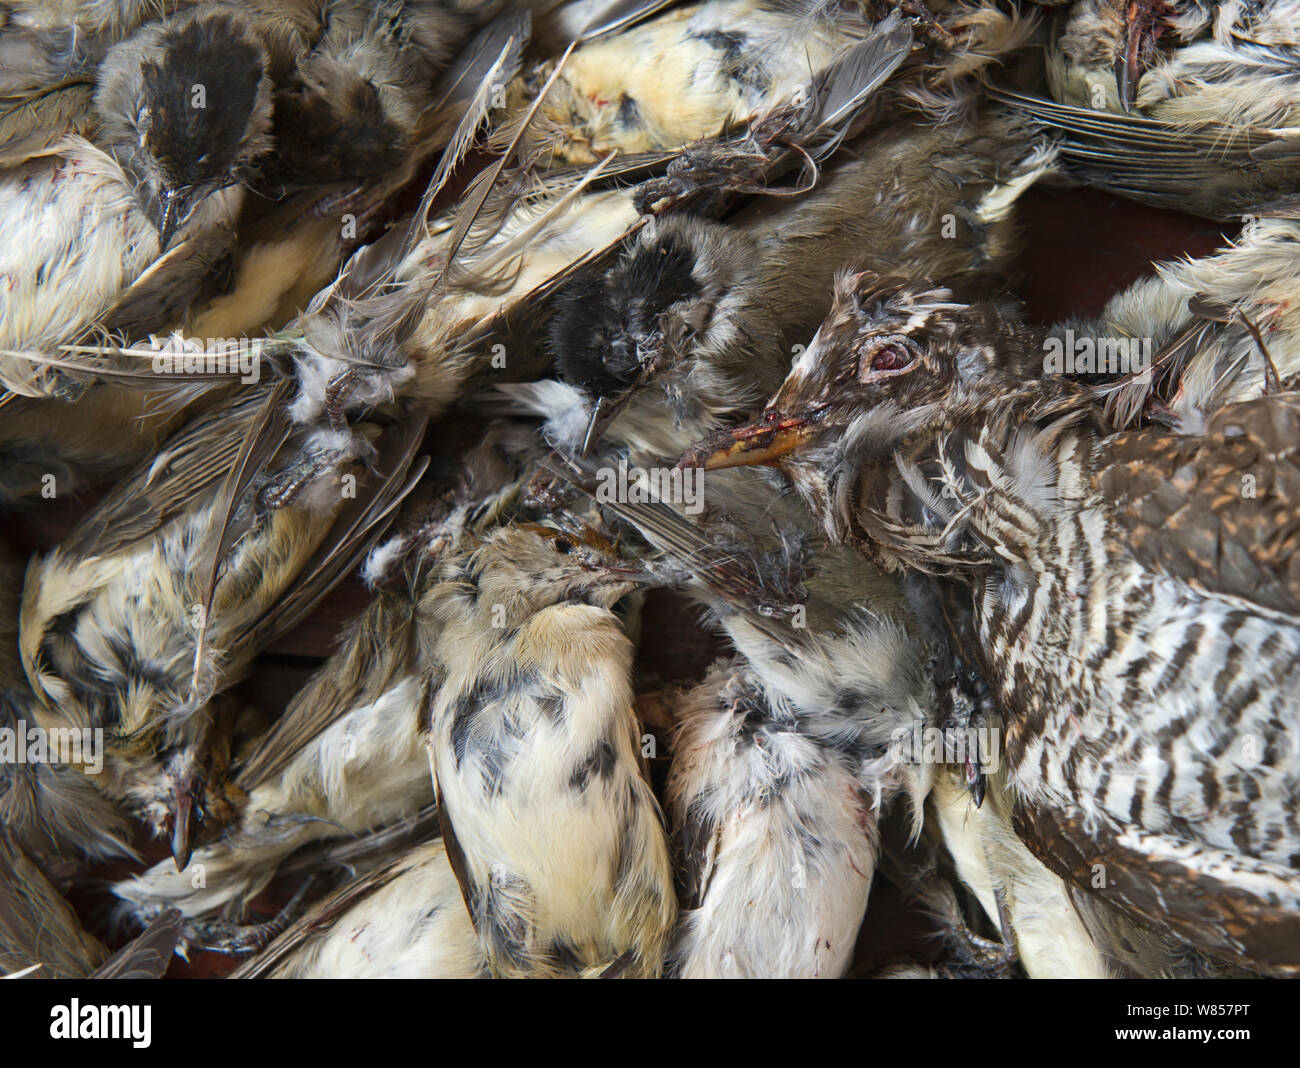 Seized dead birds from raid on illegal trapping operatuon by the Game Fund in Republic of Cyprus area, birds include Cuckoo (Cuculus canorus), many Blackcaps (Sylvia atricapilla), Spotted Flycatchers (Muscicapa striata), Lesser Whitethroat (Sylvia curruca), Masked Shrike (Lanius nubicus) and Willow Warblers (Phylloscopus trochilus). They are trapped for a food delicacy known as ambelopoulia, Cyprus, September 2011 Stock Photo